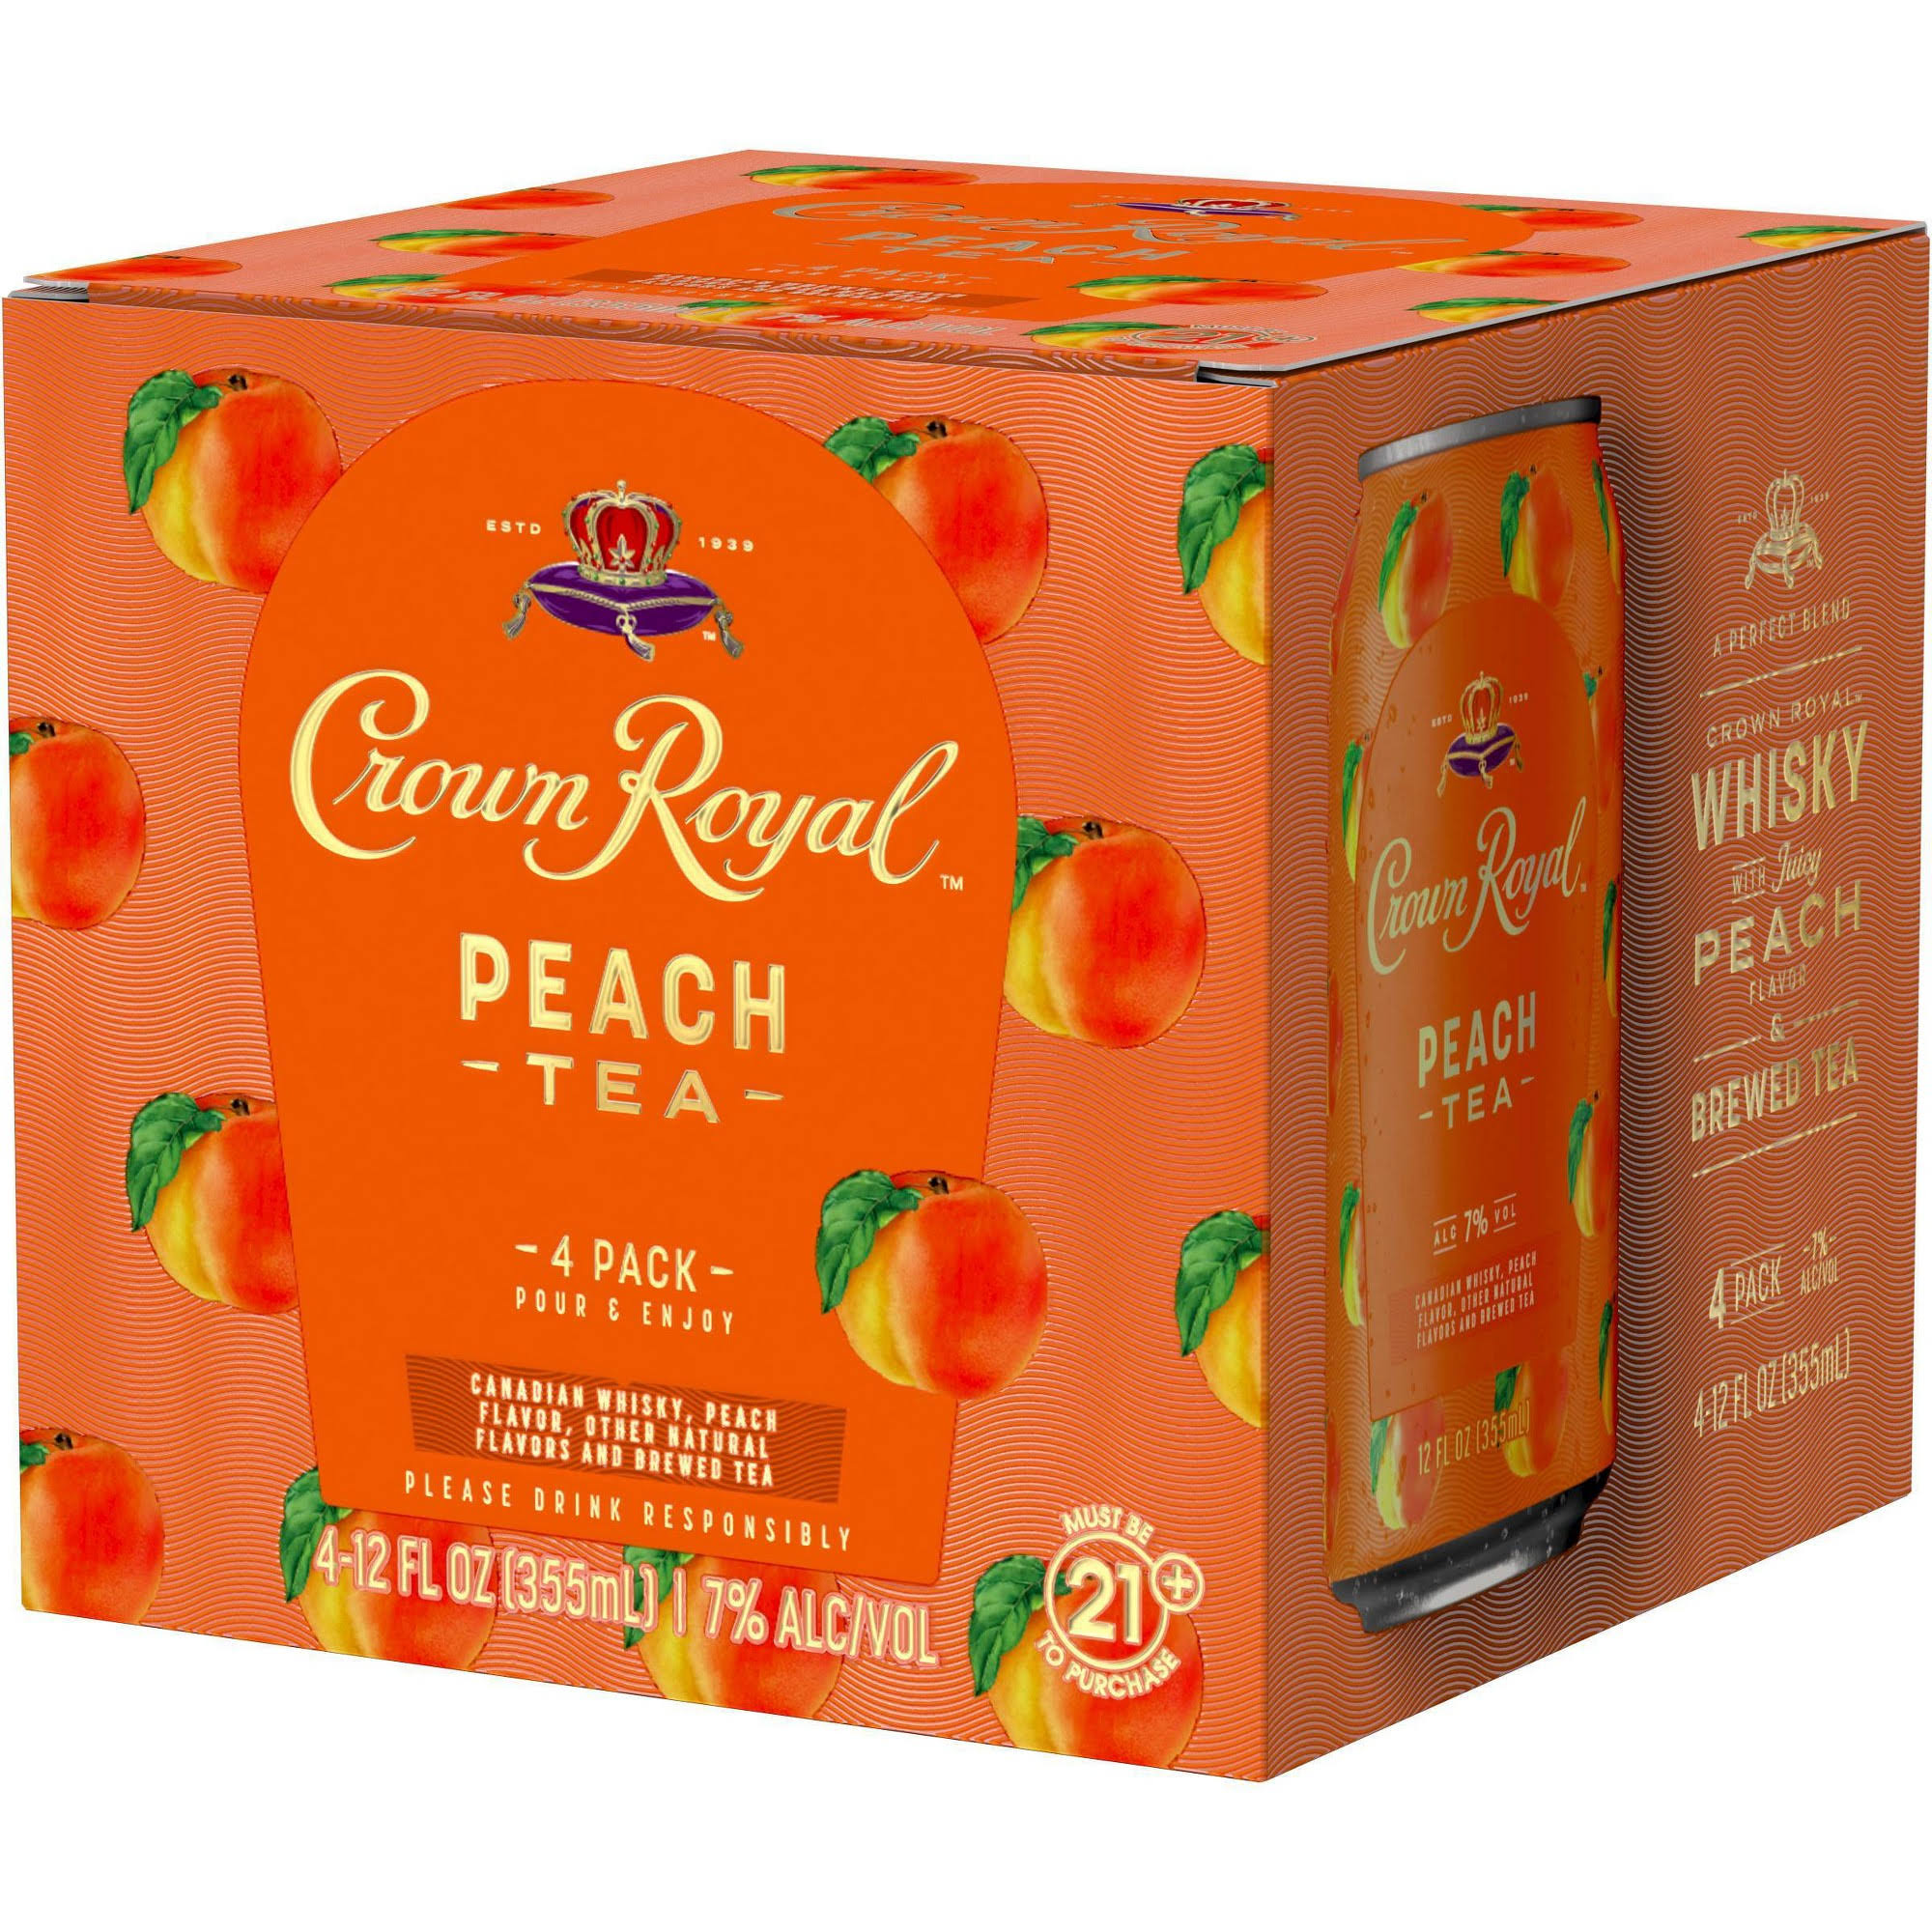 Crown Royal Whisky Cocktail, Peach Tea, 4 Pack - 4 pack, 12 fl oz cans